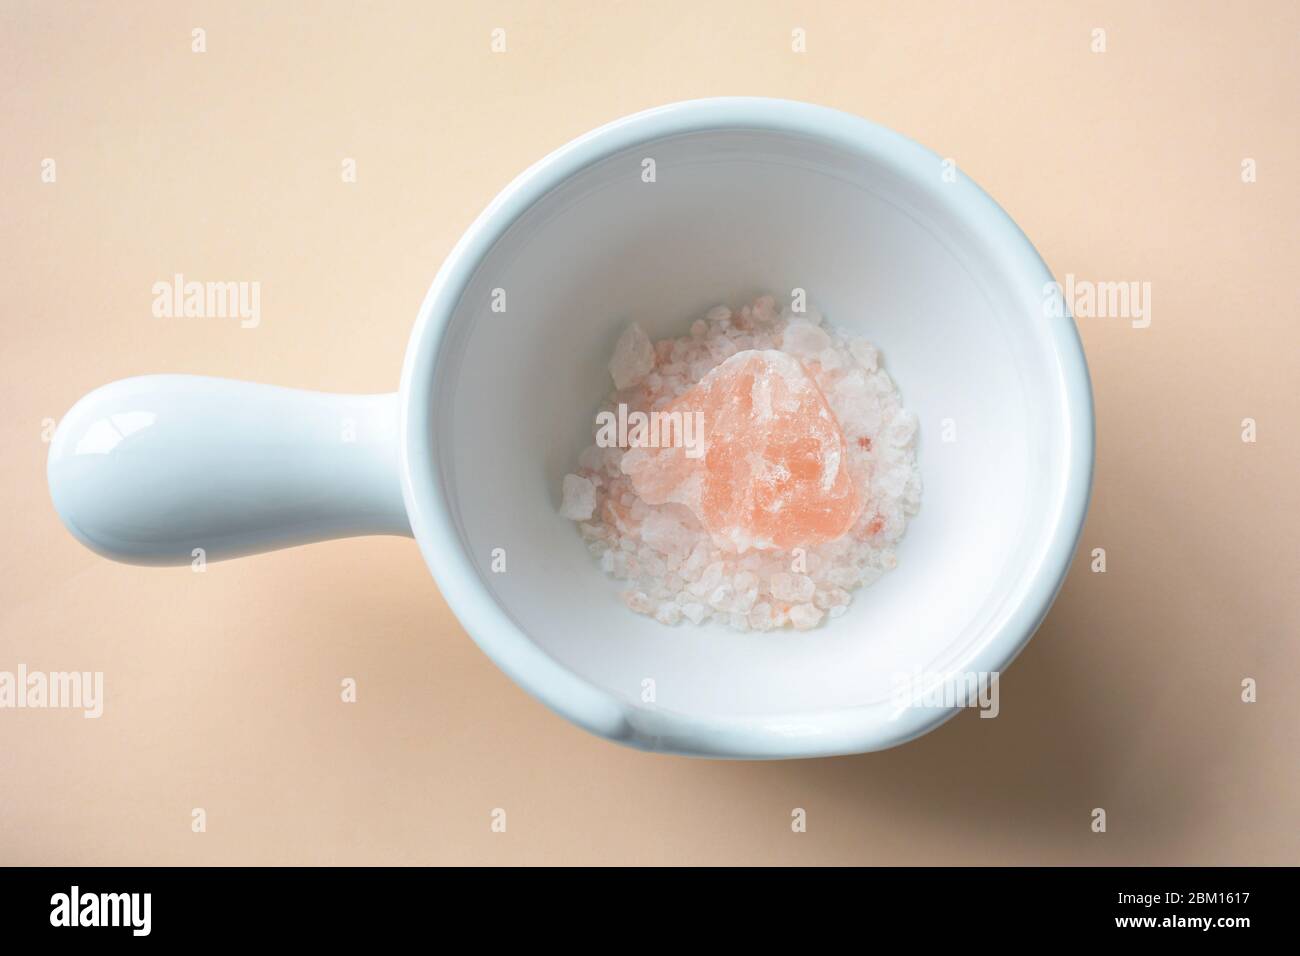 Himalayan pink rock salt crystals pieces in a ceramic white bowl mortar on coral background Stock Photo